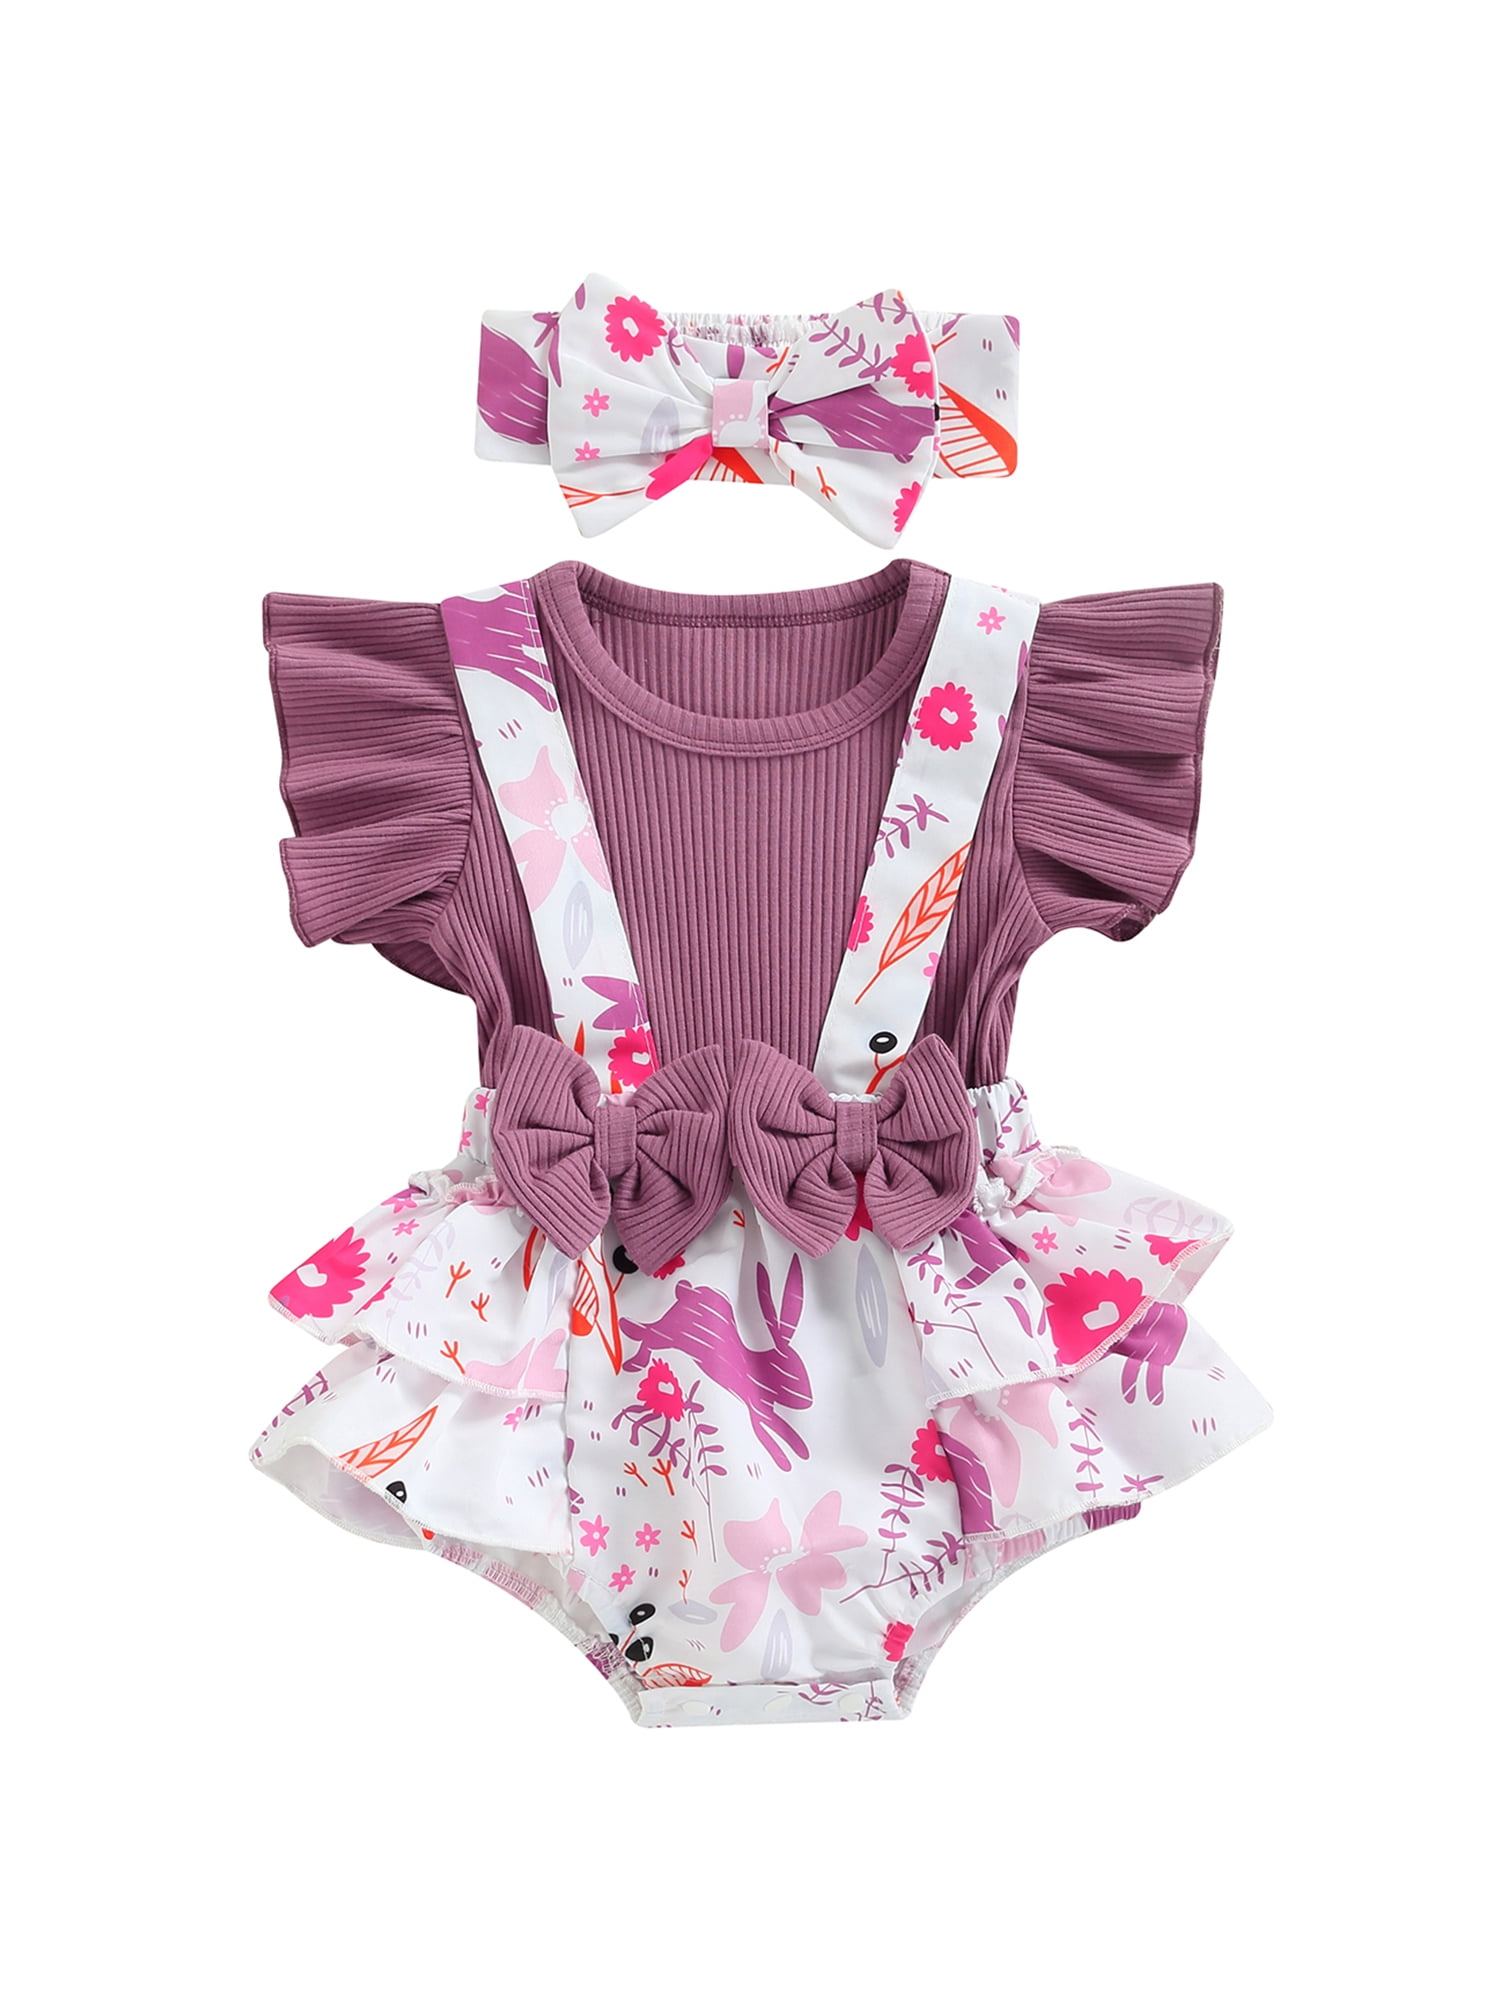 Baby Girls Pink Frill Neck Bows Romper Bodysuit Playsuit Spanish style 